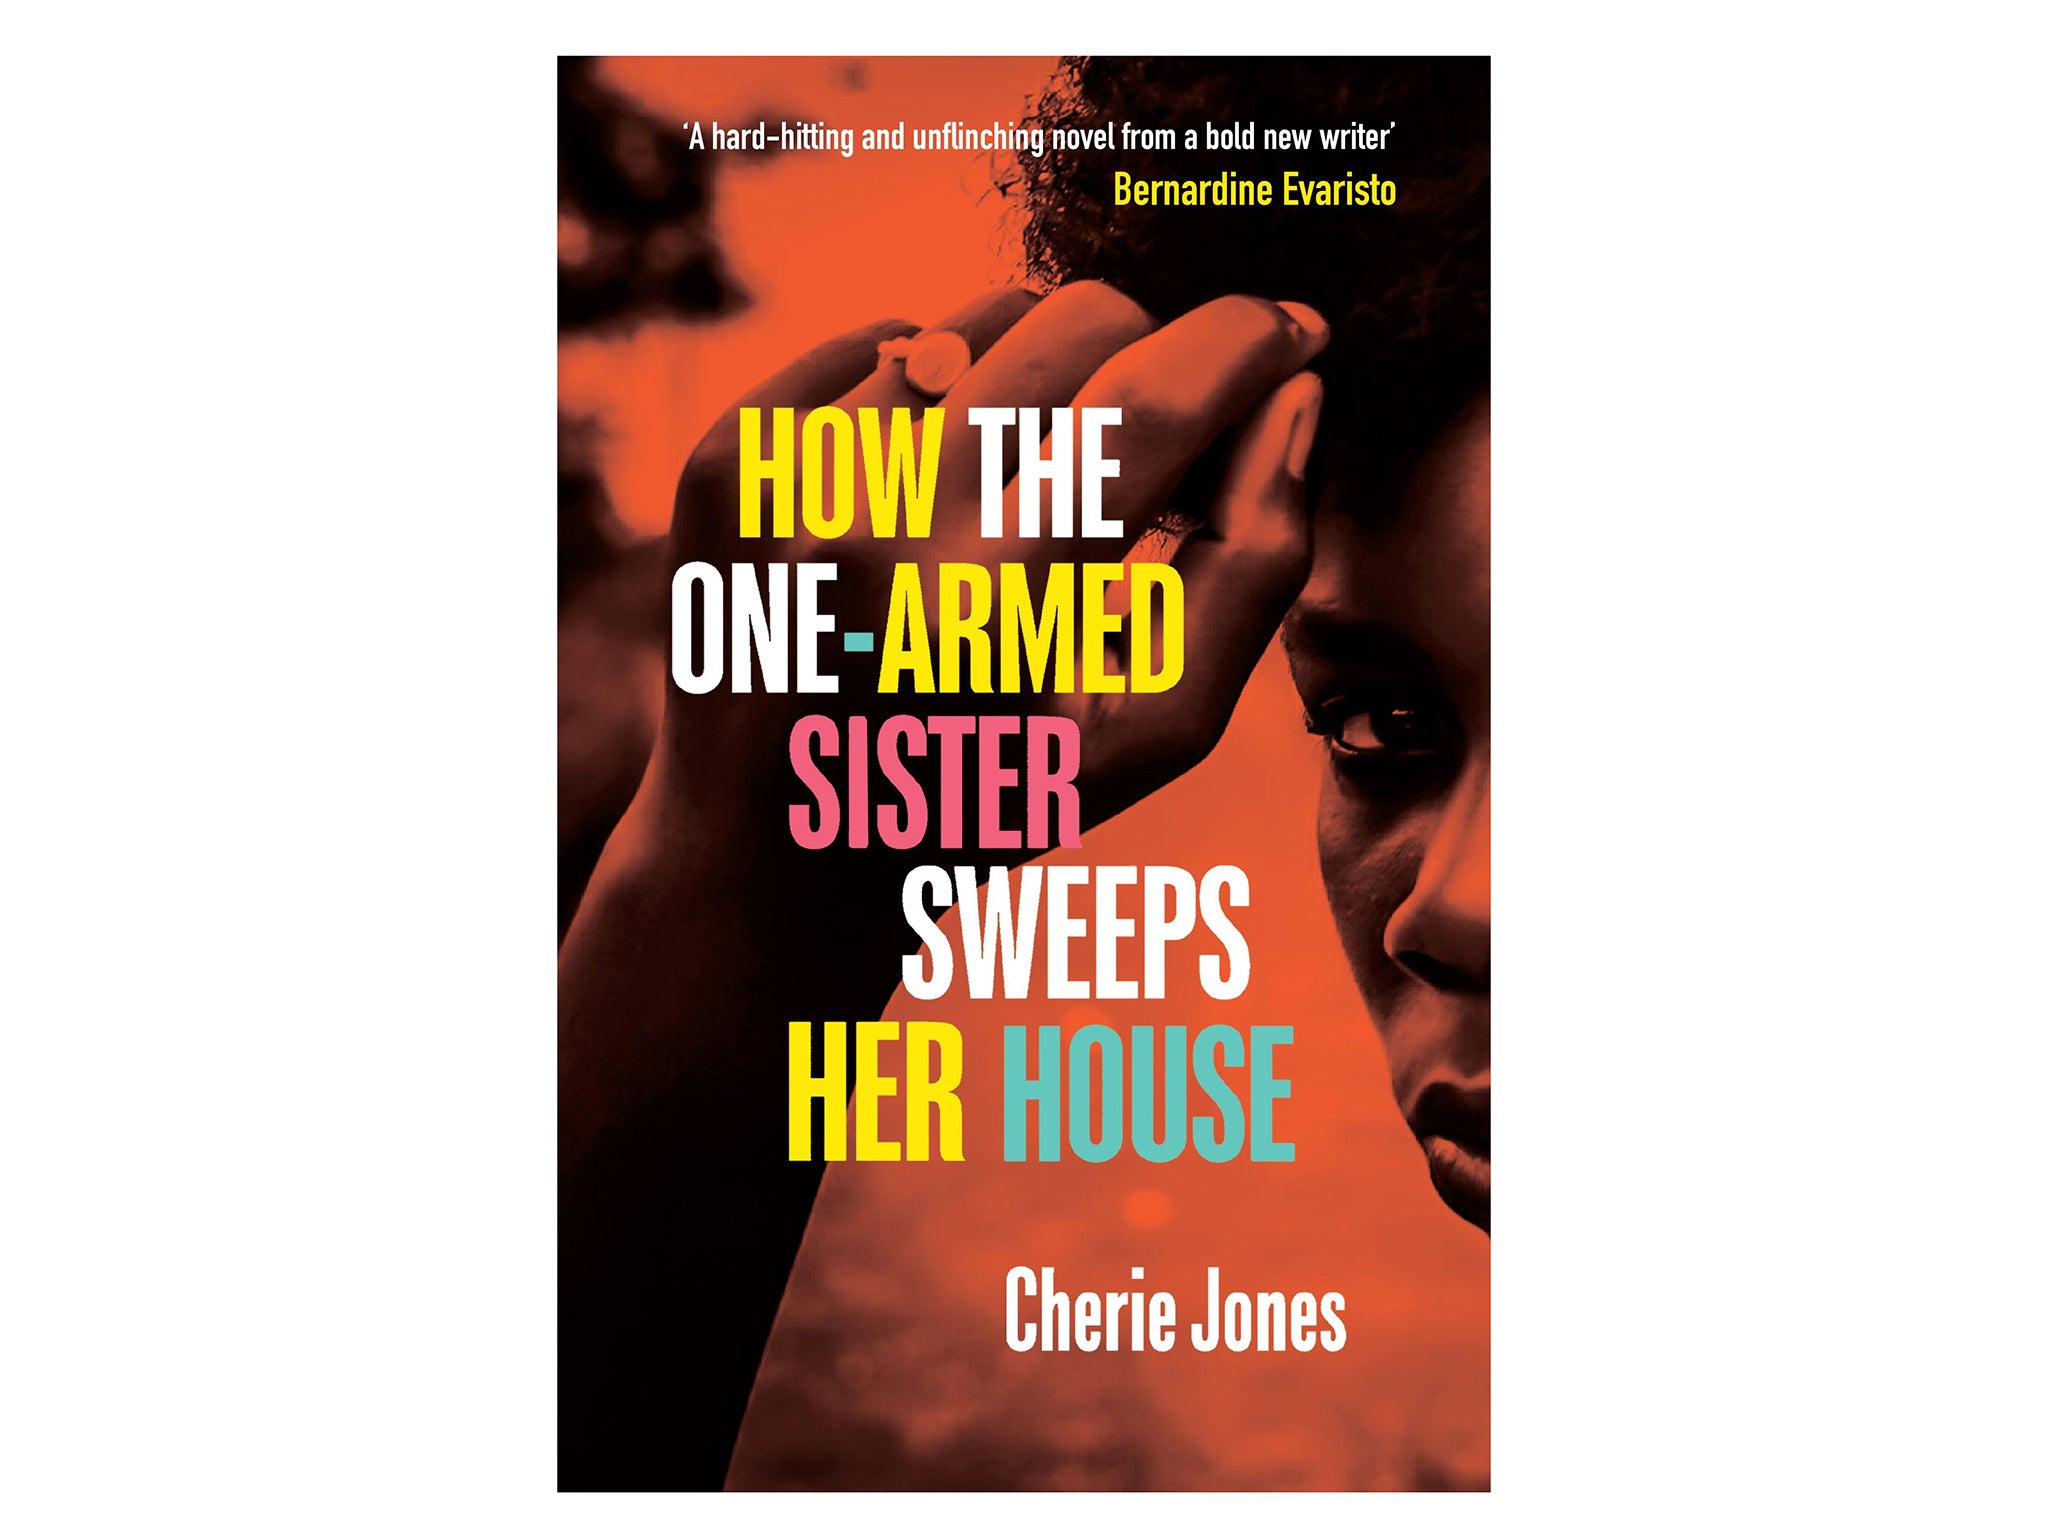 How-the-One-Armed-Cherie-Jones-indybest-womens-prize-for-fiction.jpg